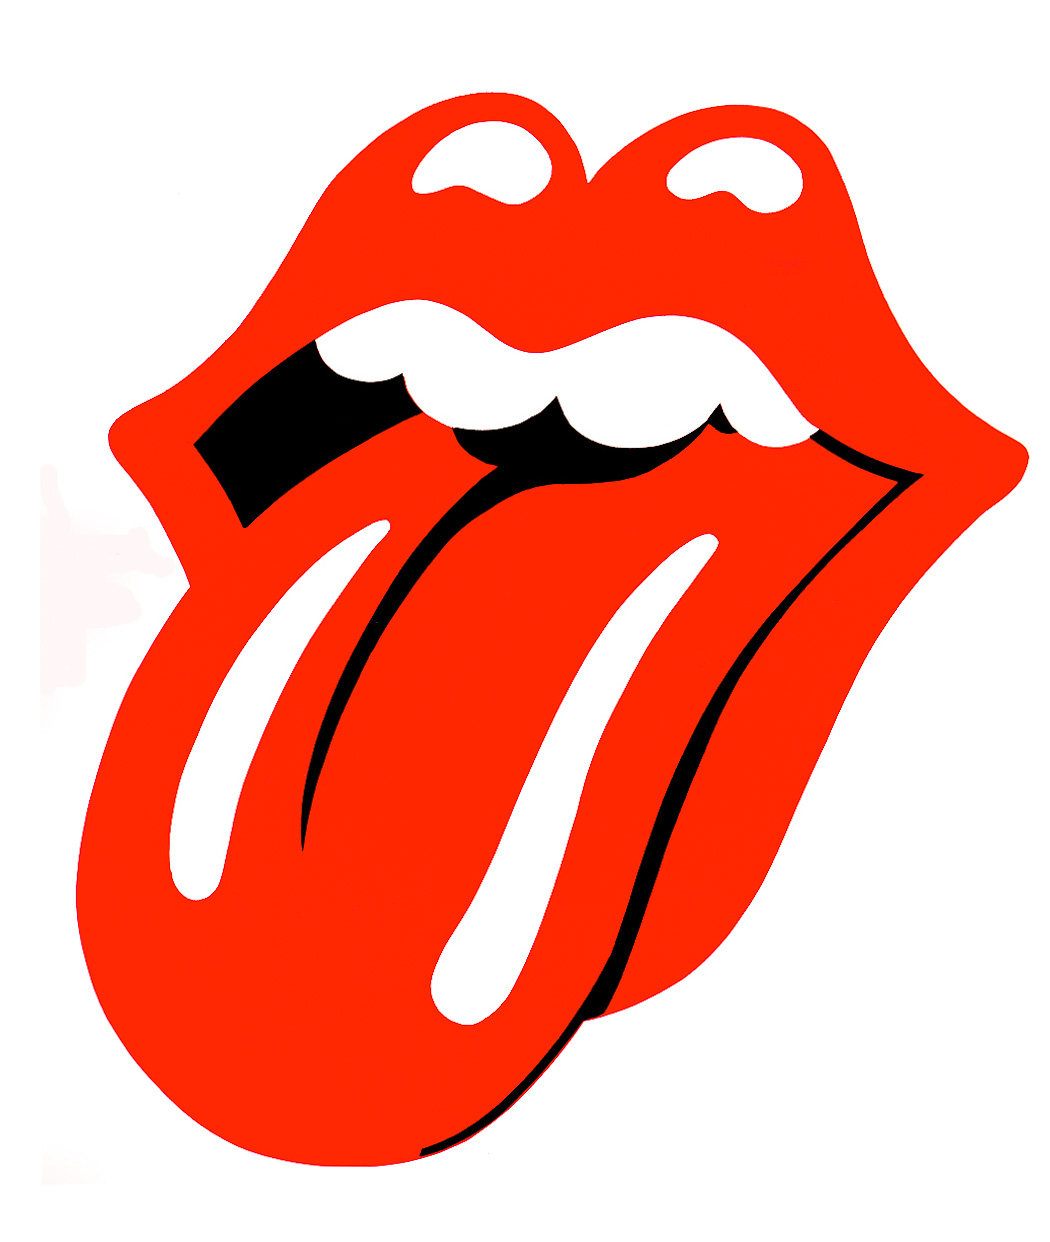 The Rollling Stones